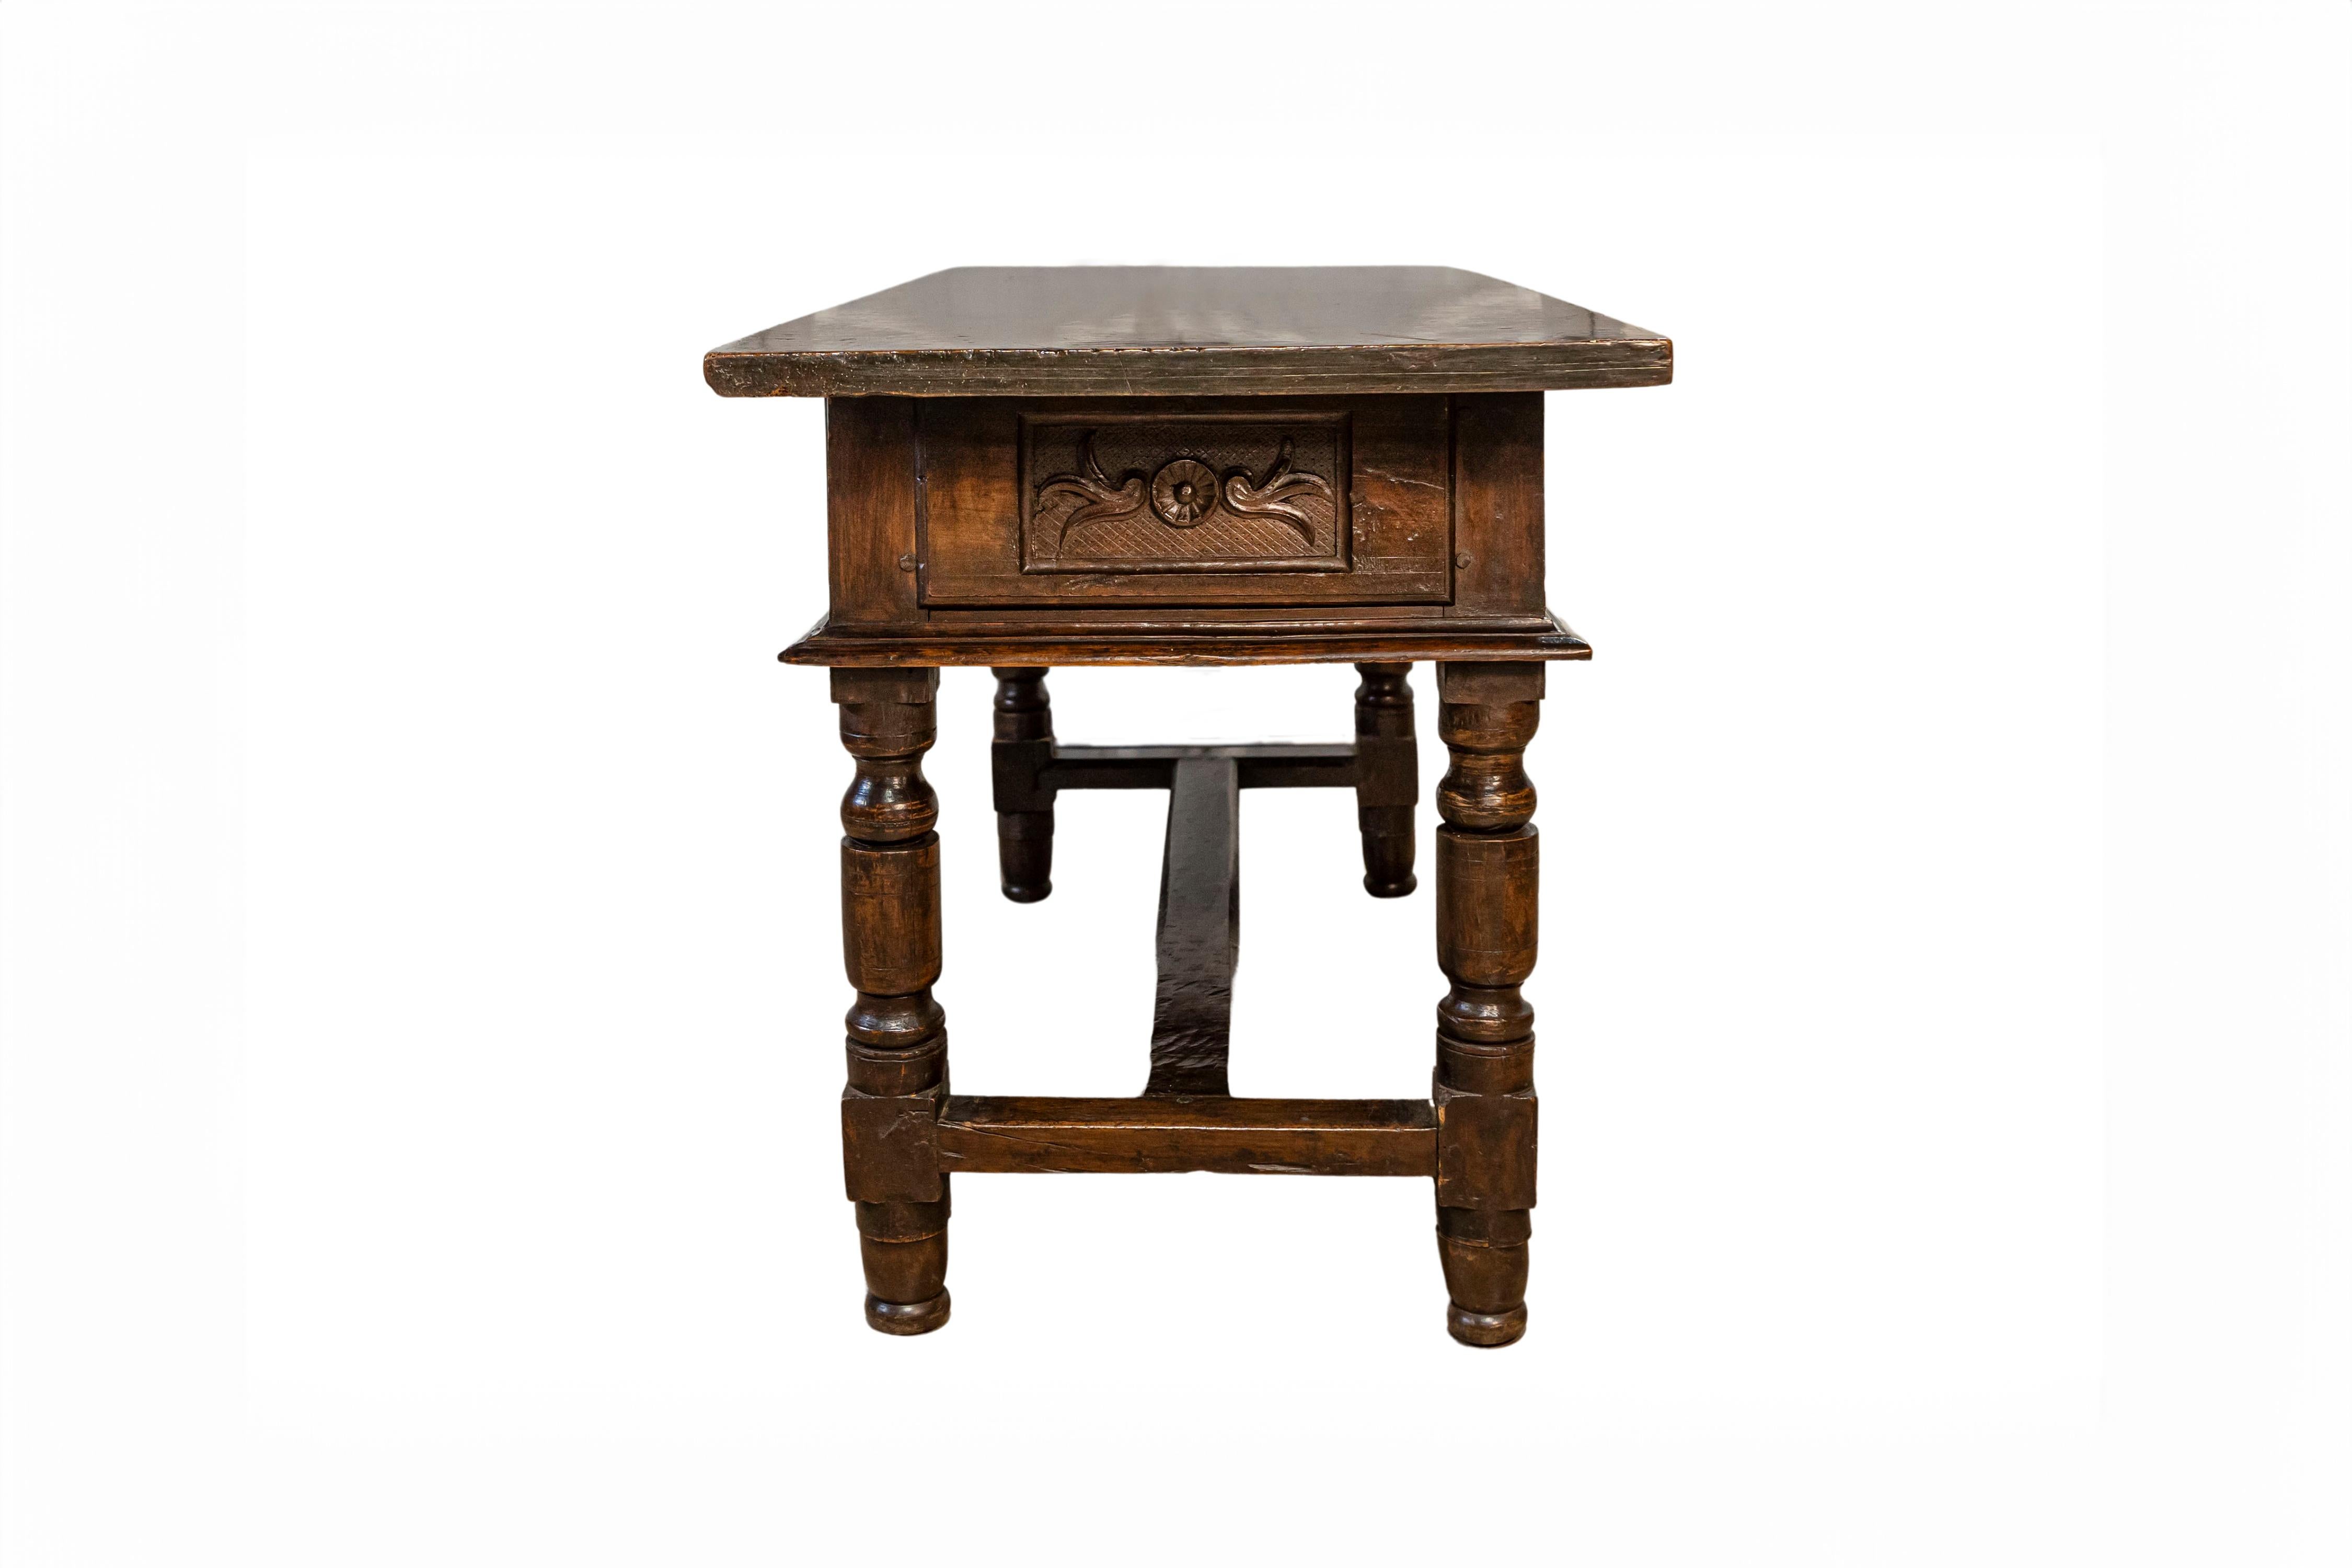 Spanish Baroque 17th Century Walnut Table with Carved Drawers and Turned Legs In Good Condition For Sale In Atlanta, GA